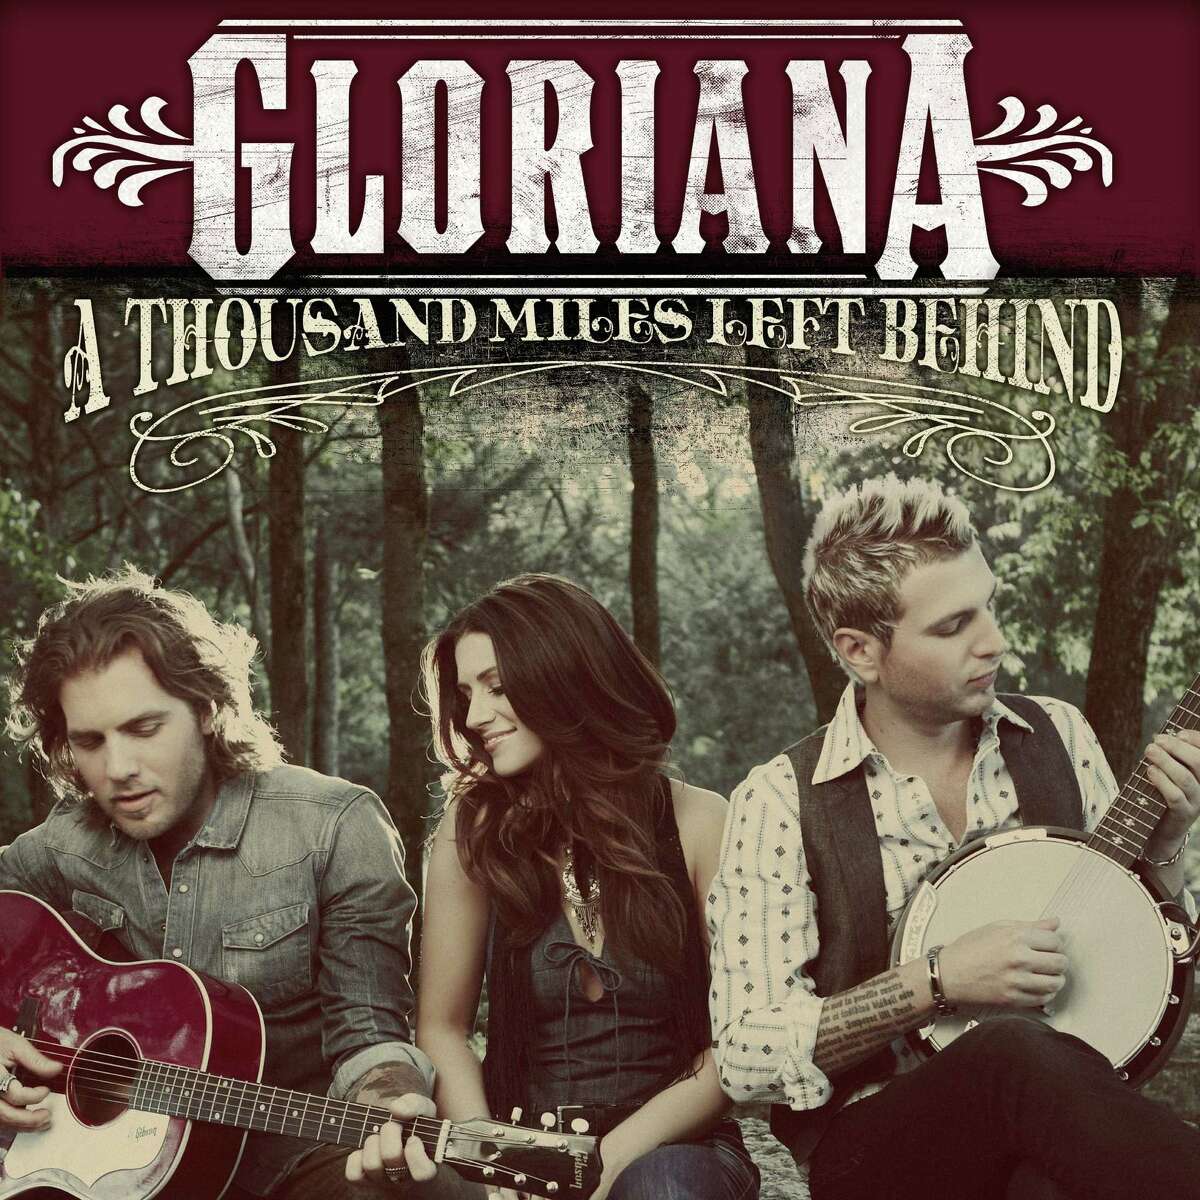 Country trio Gloriana, shown on the cover of the “A Thousand Miles Left Behind” album, will play Cowboys Dancehall Saturday. See Quick Picks, Page 19.